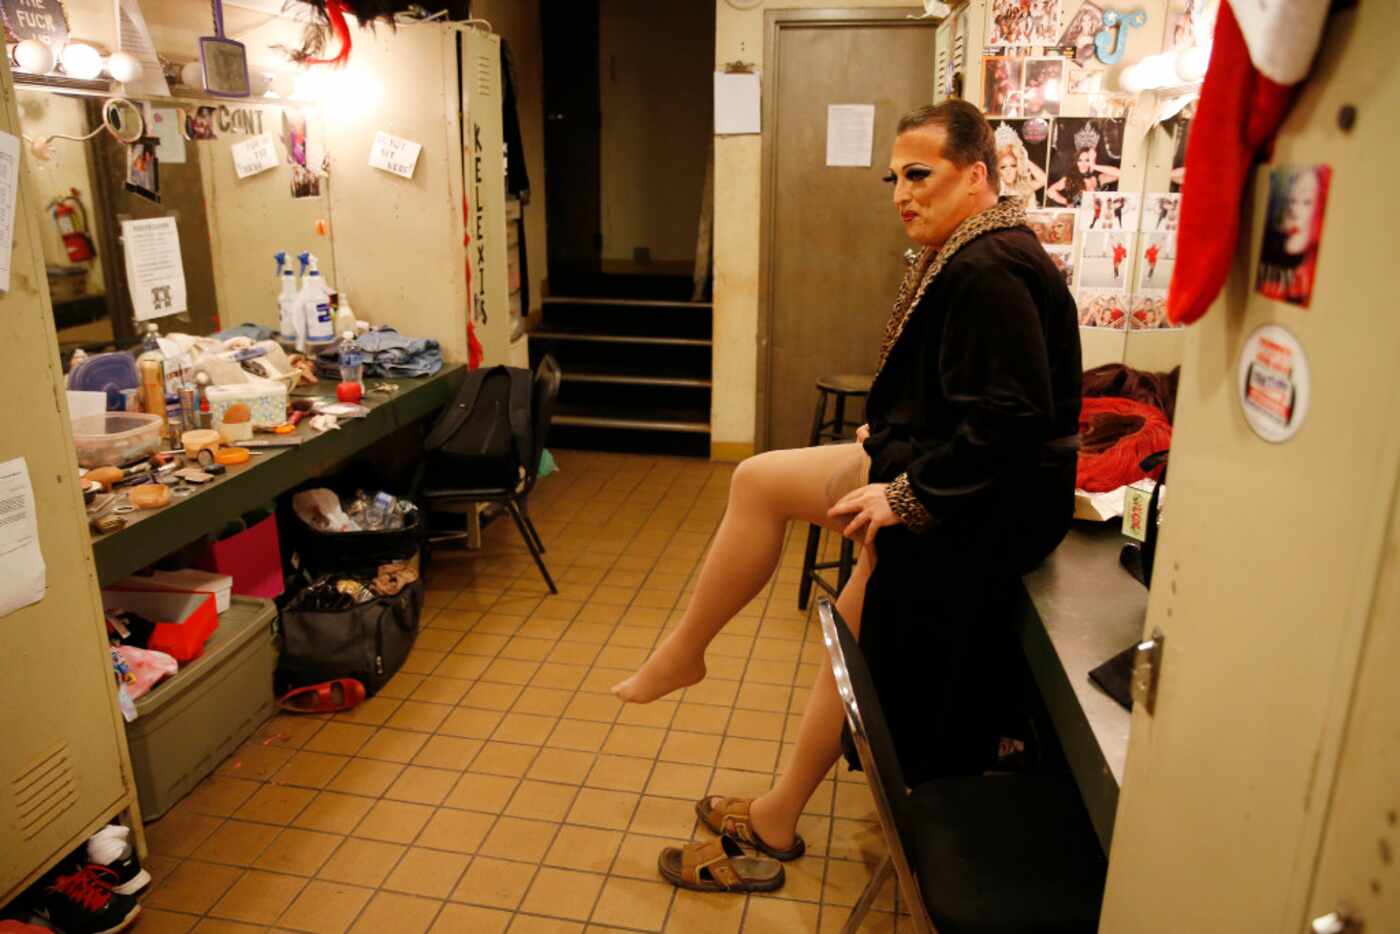 James Love puts on his pantyhose before performing as "Cassie Nova" at Sue Ellen's in...